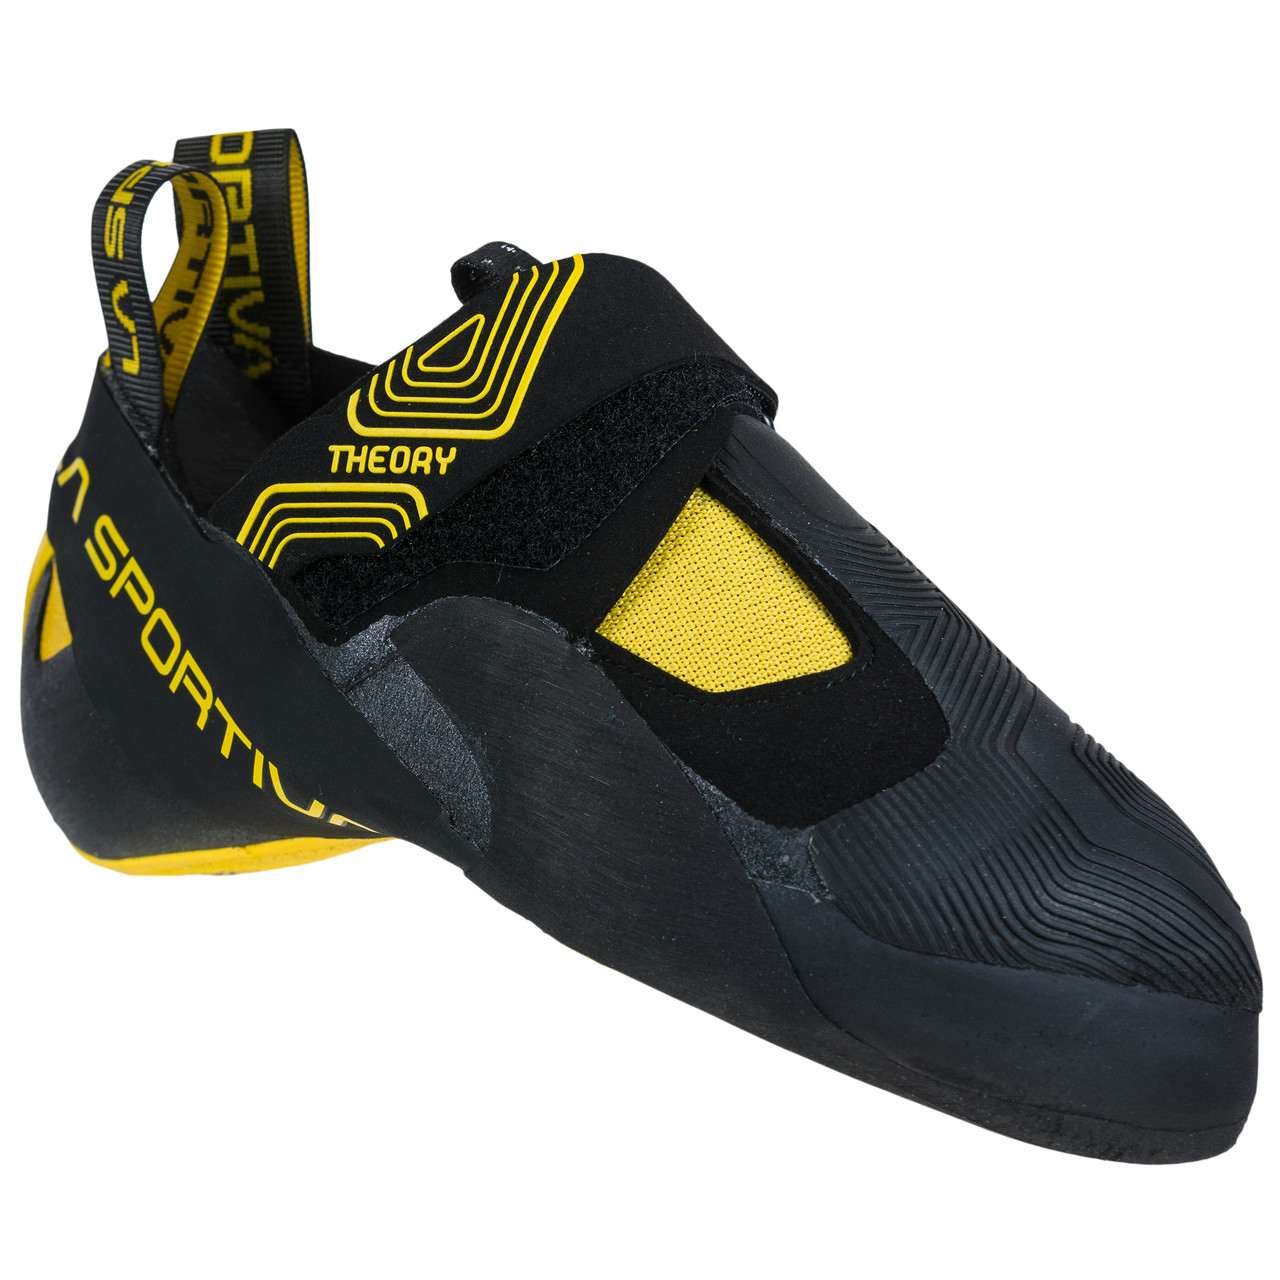 Theory Rock Shoes Black/Yellow